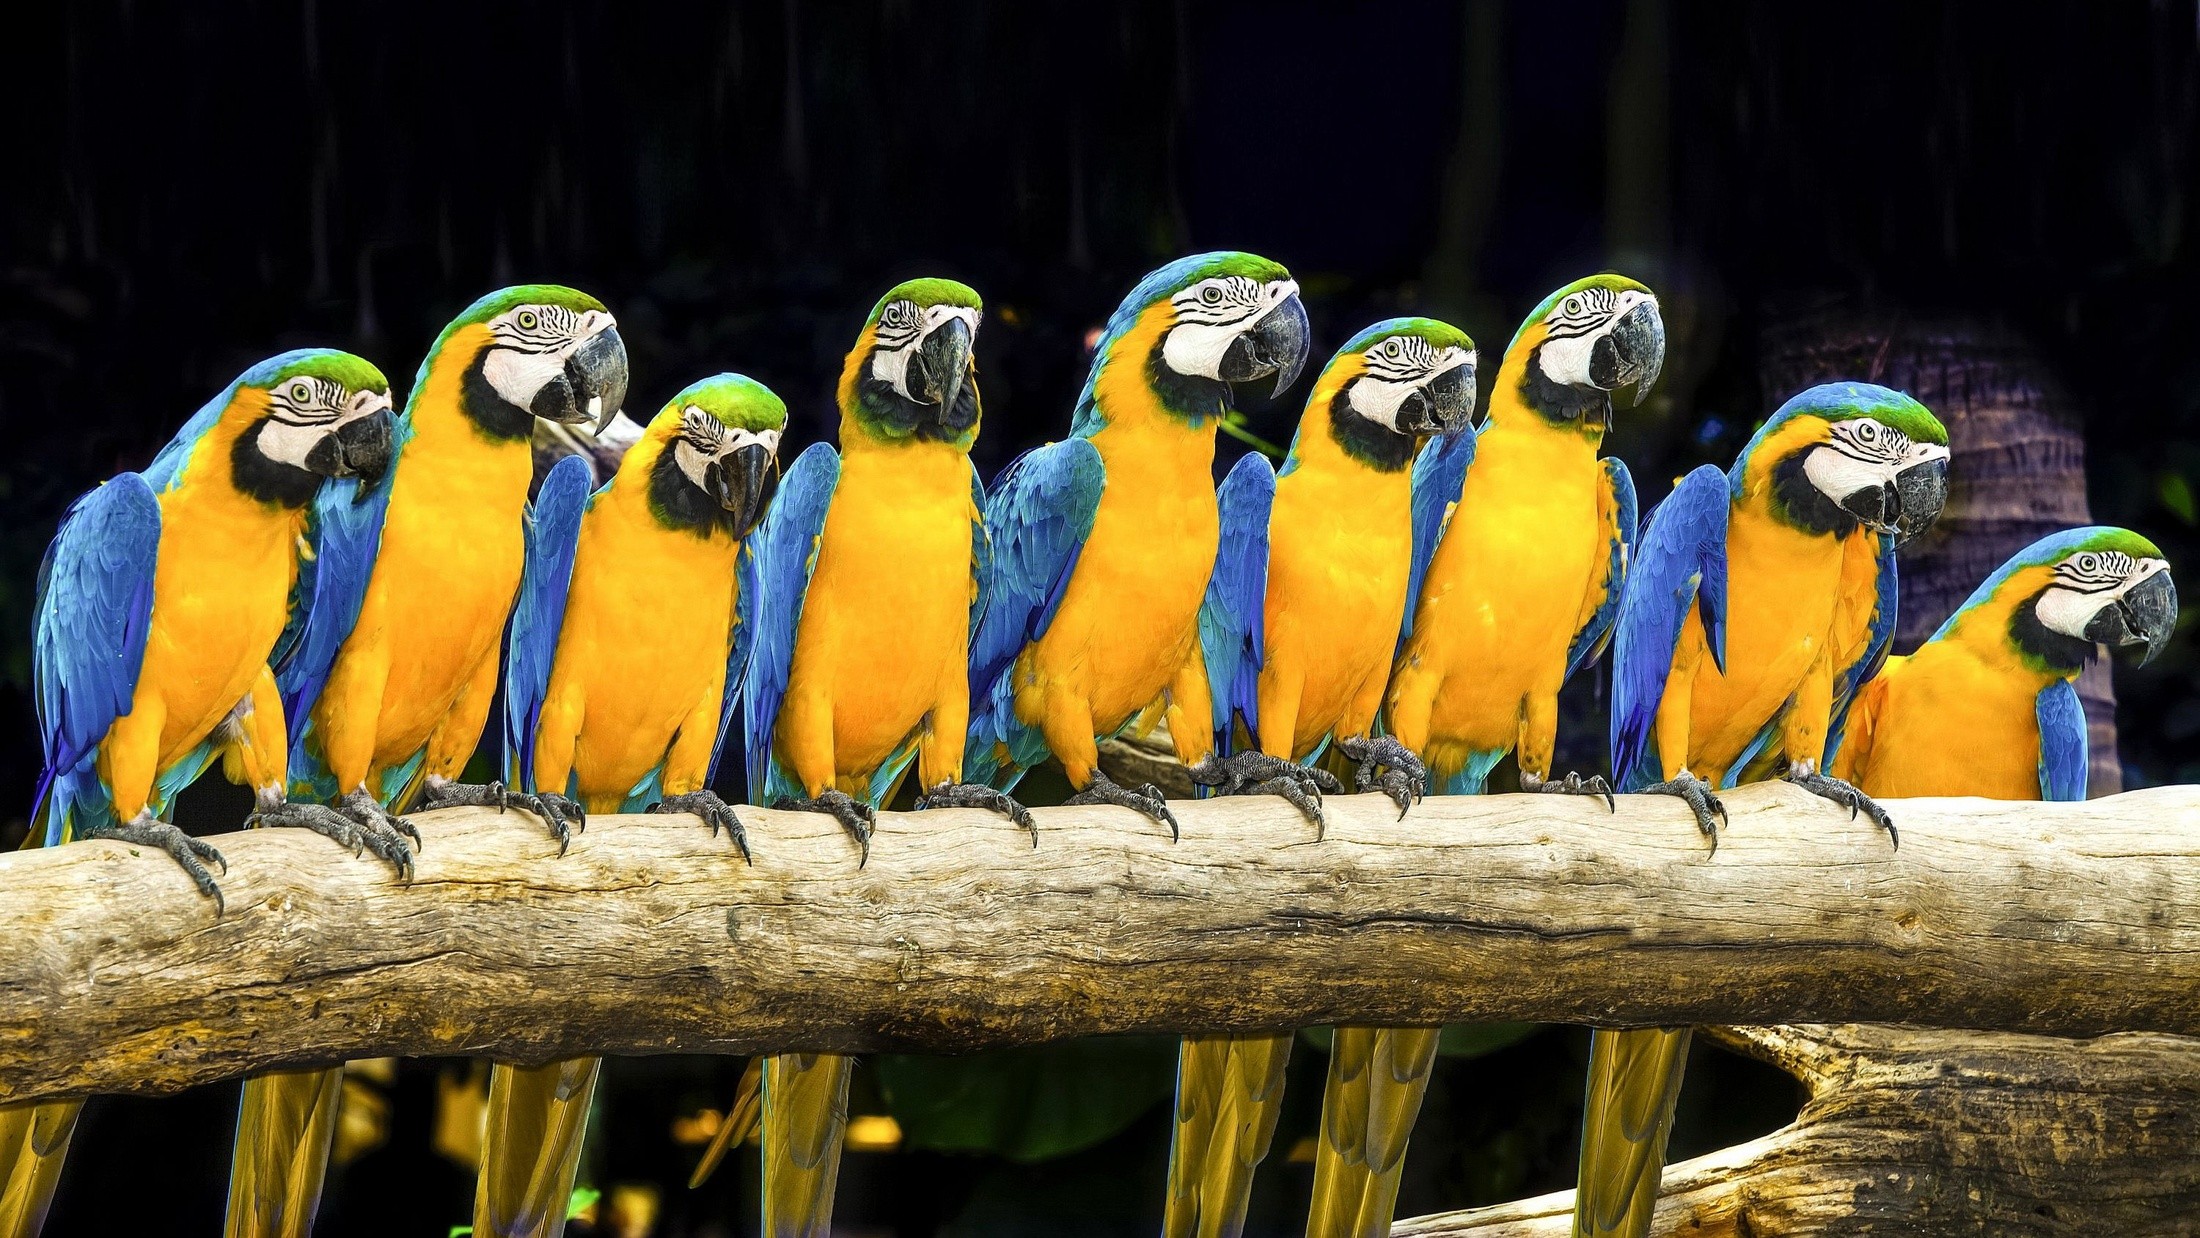 General 2200x1238 animals birds parrot macaws Blue-and-Yellow Macaw